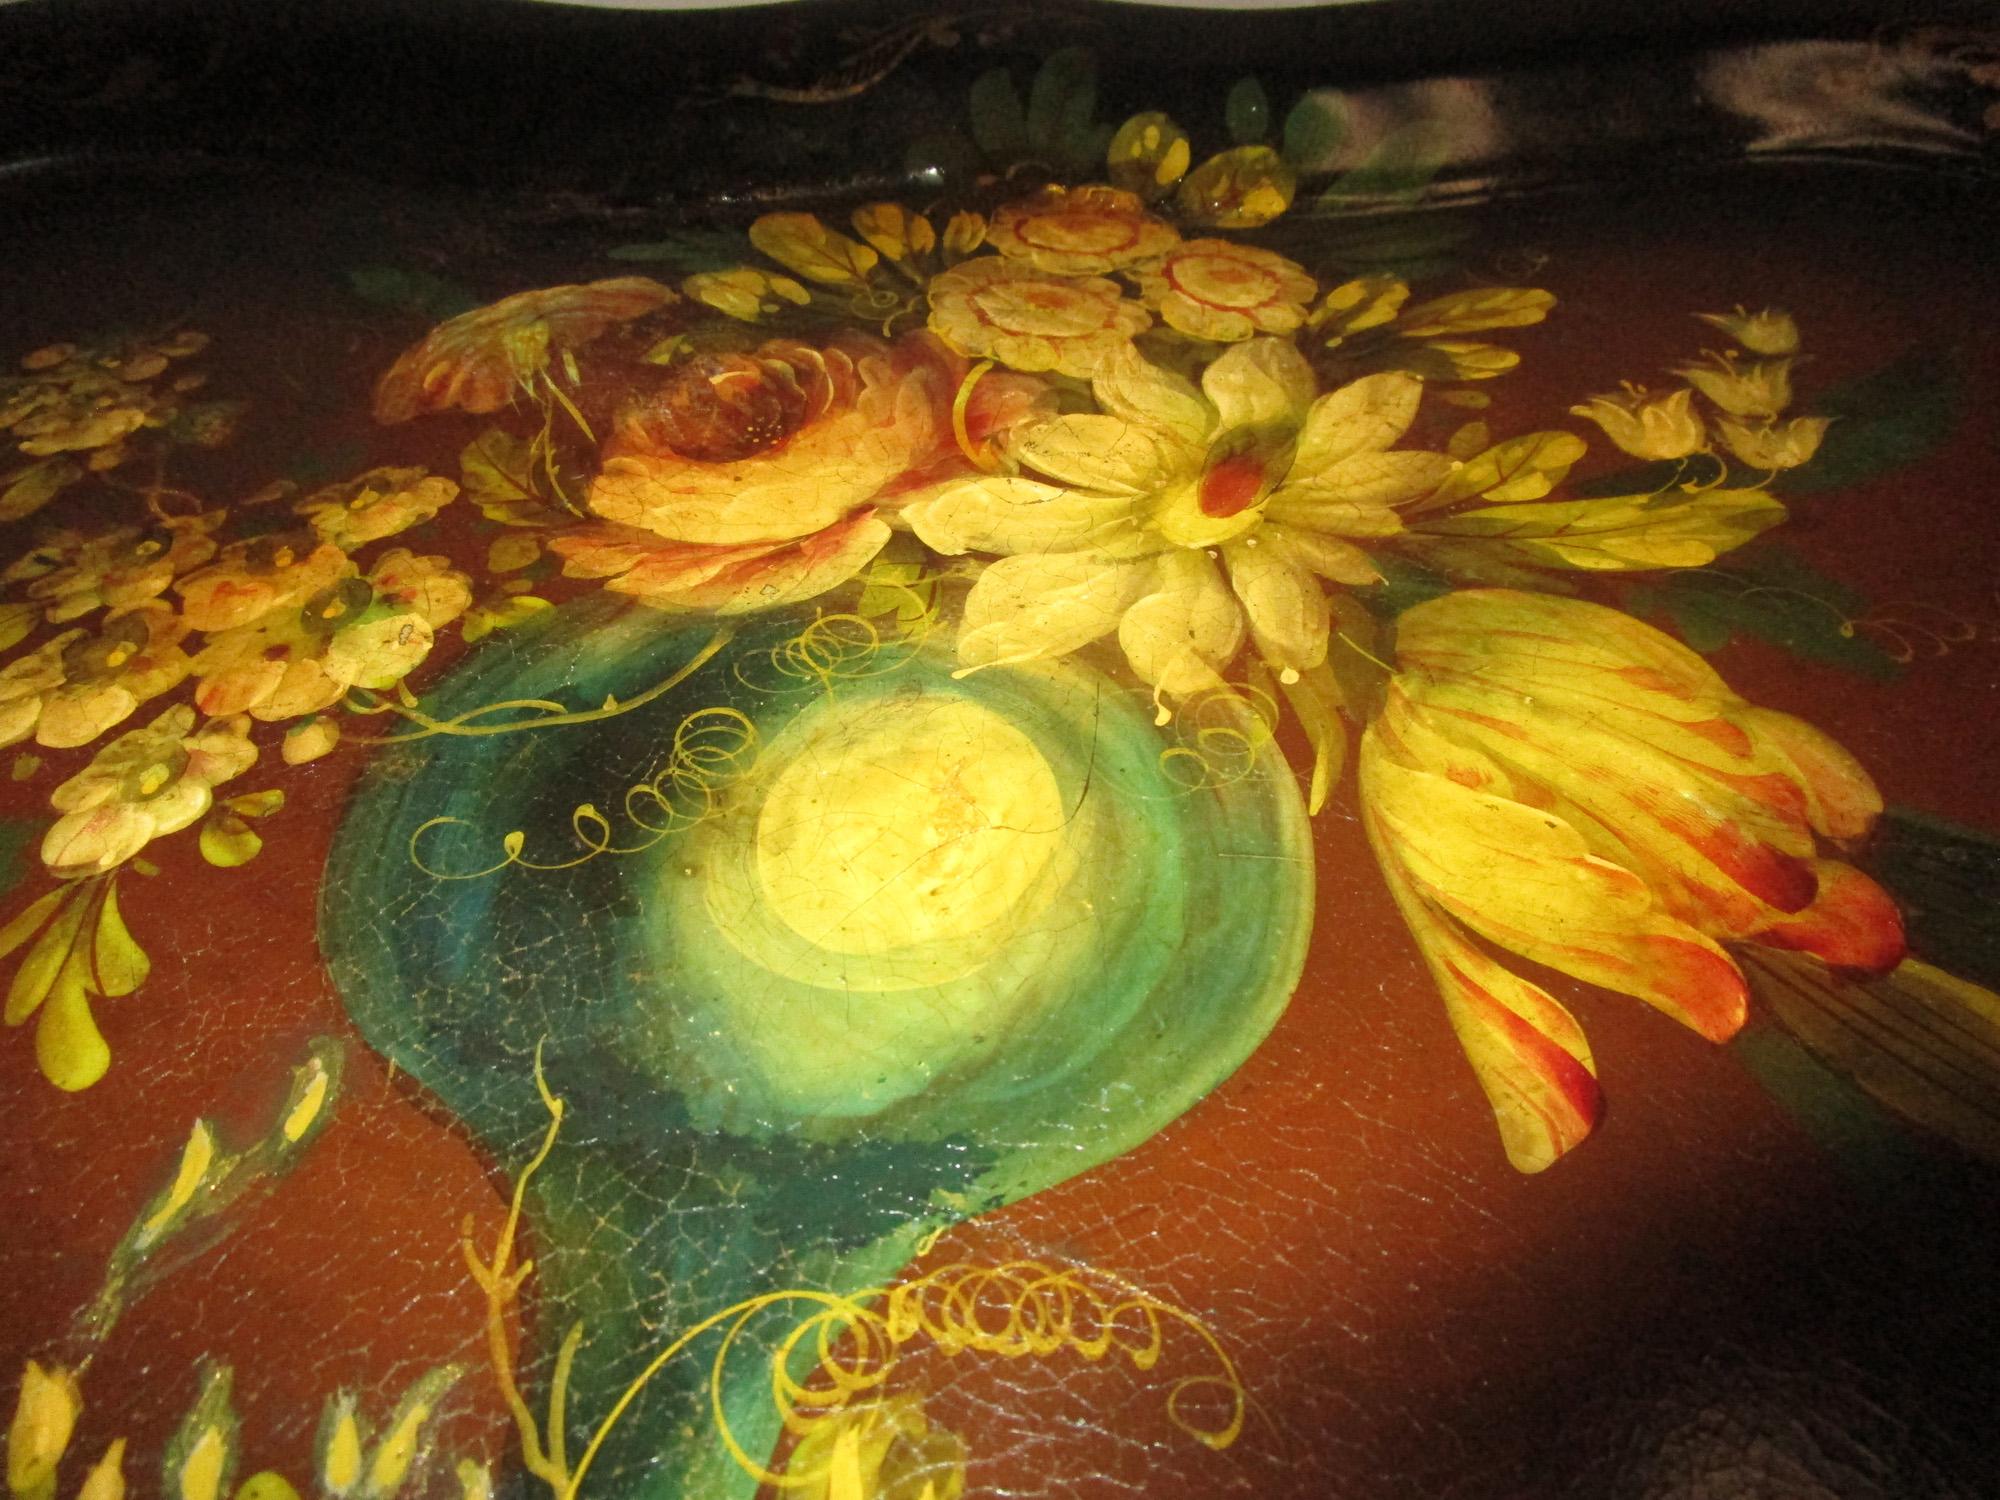 Scalloped shape black papier mâché tray table with very vibrant and detailed floral design. The stunning tray was mounted later on a faux bamboo custom wooden base.